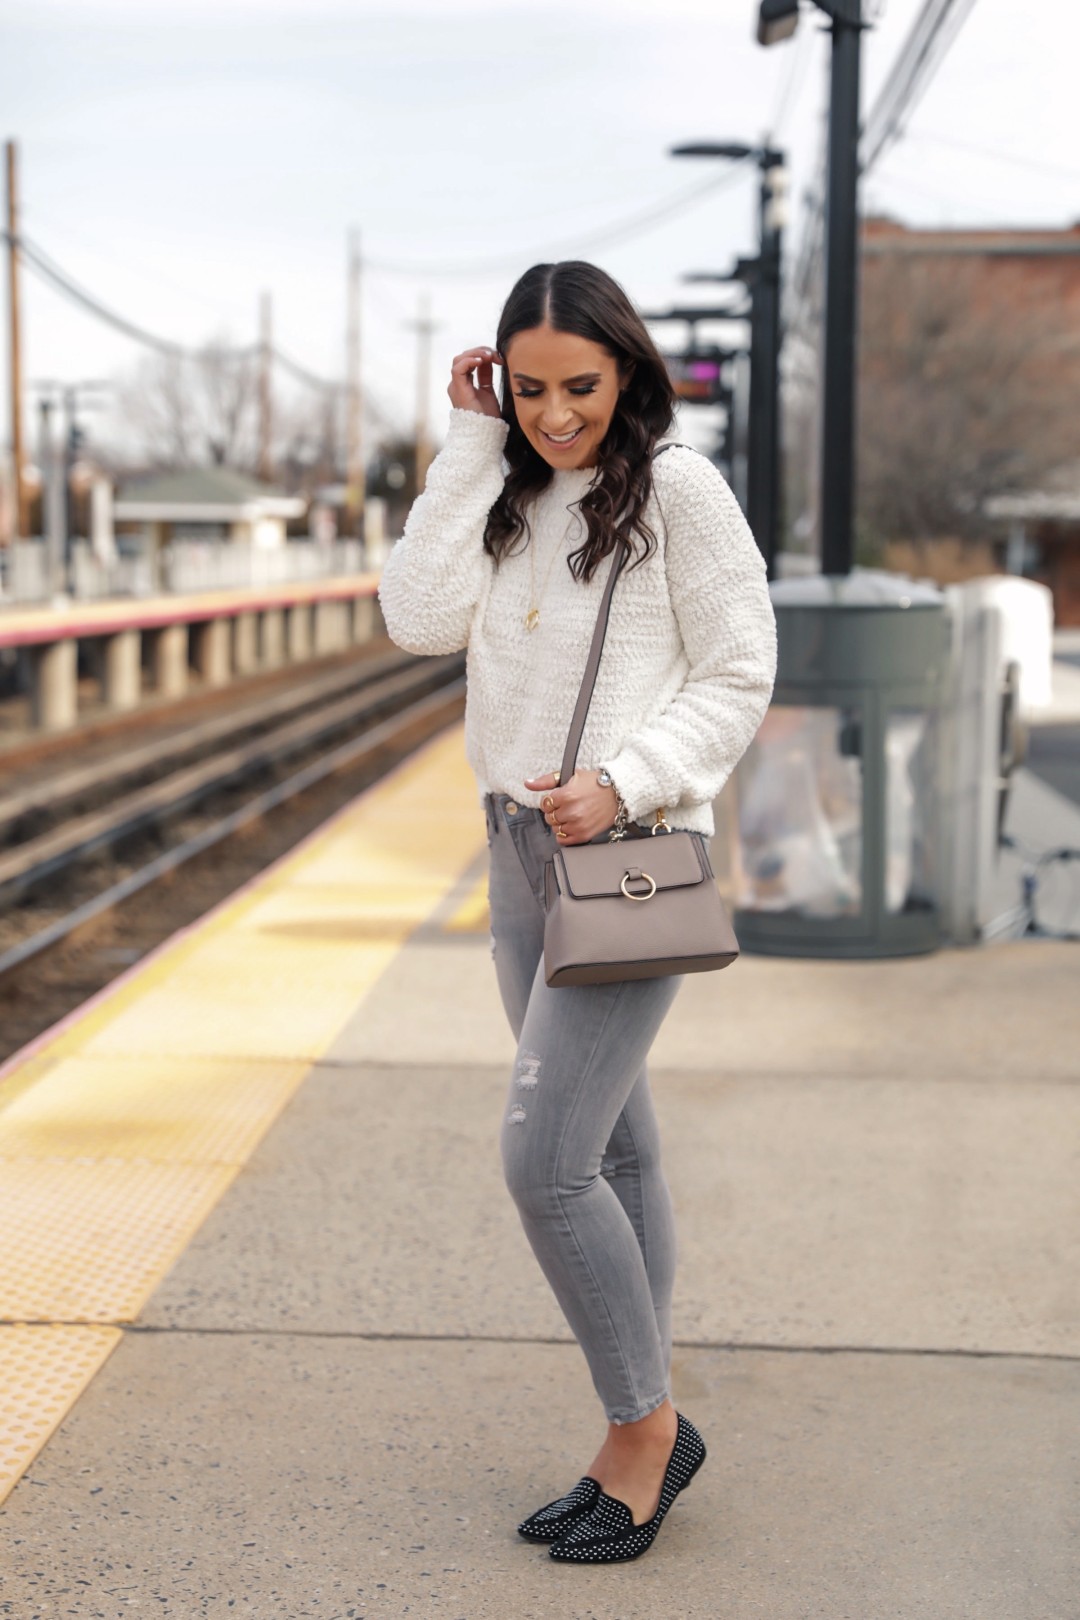 Blogger Sarah Lindner of The House of Sequins sharing OOTD with studded loafers from Walmart.